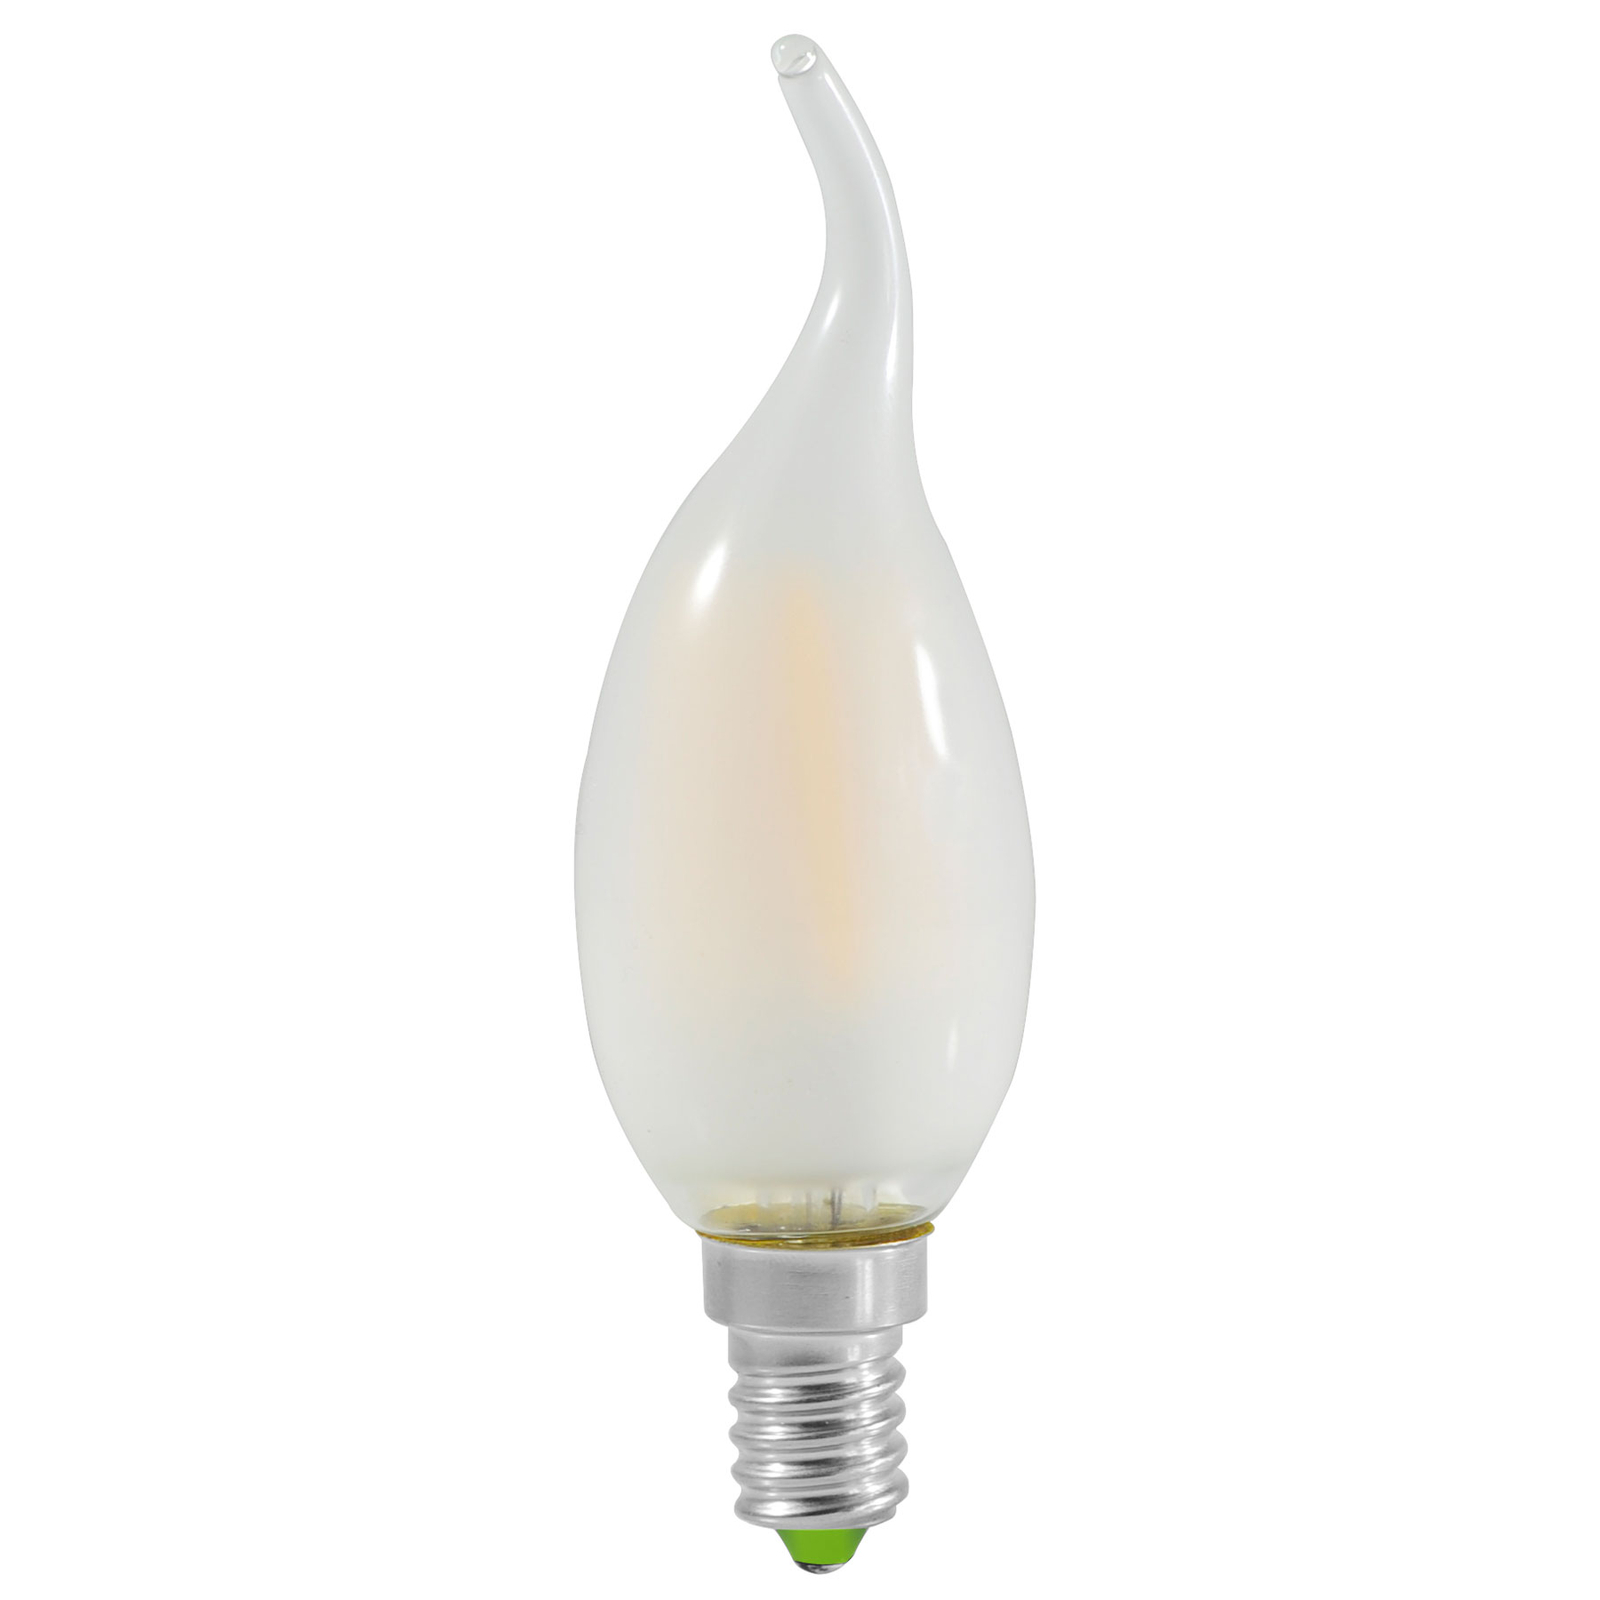 Bougie LED flamme E14 4W 450lm blanc chaud, pack 6